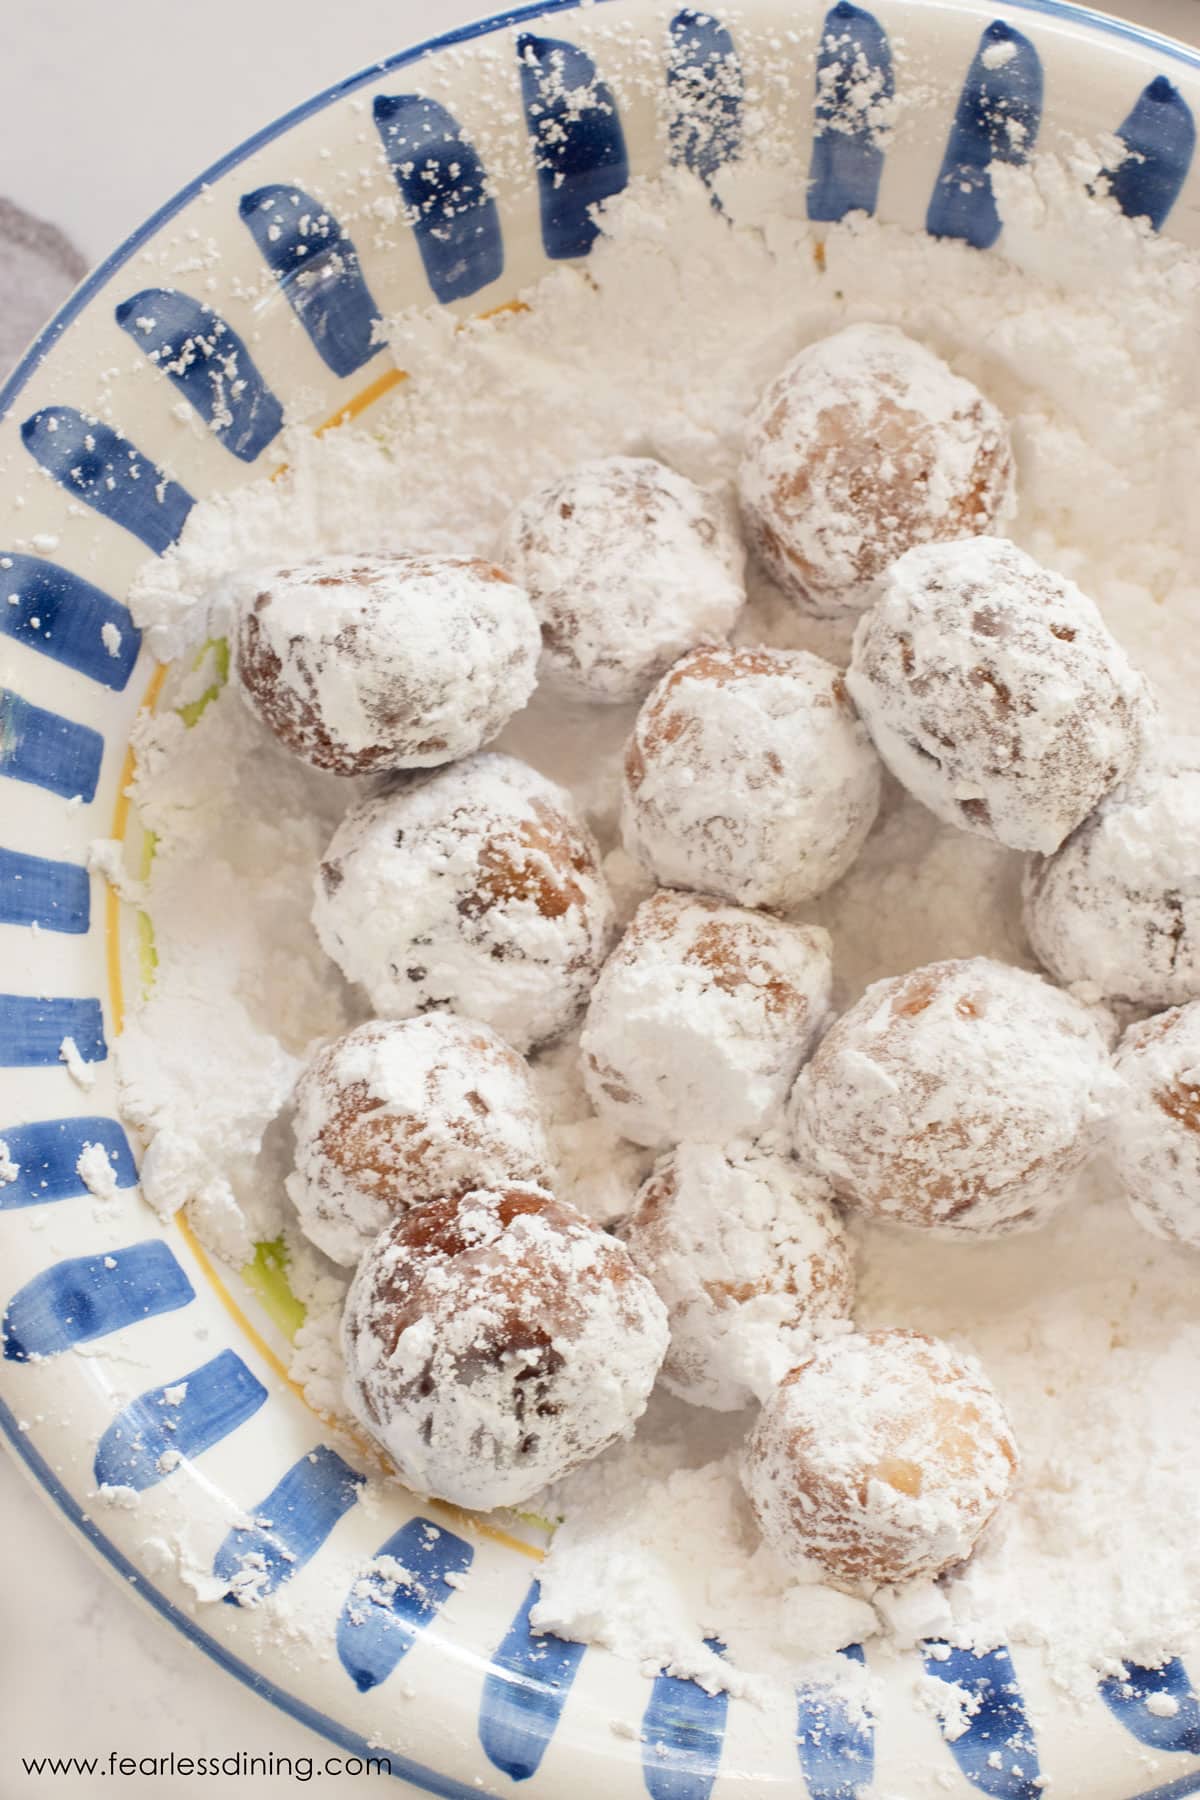 A bowl with powdered sugar and some donut holes getting coated in the sugar.